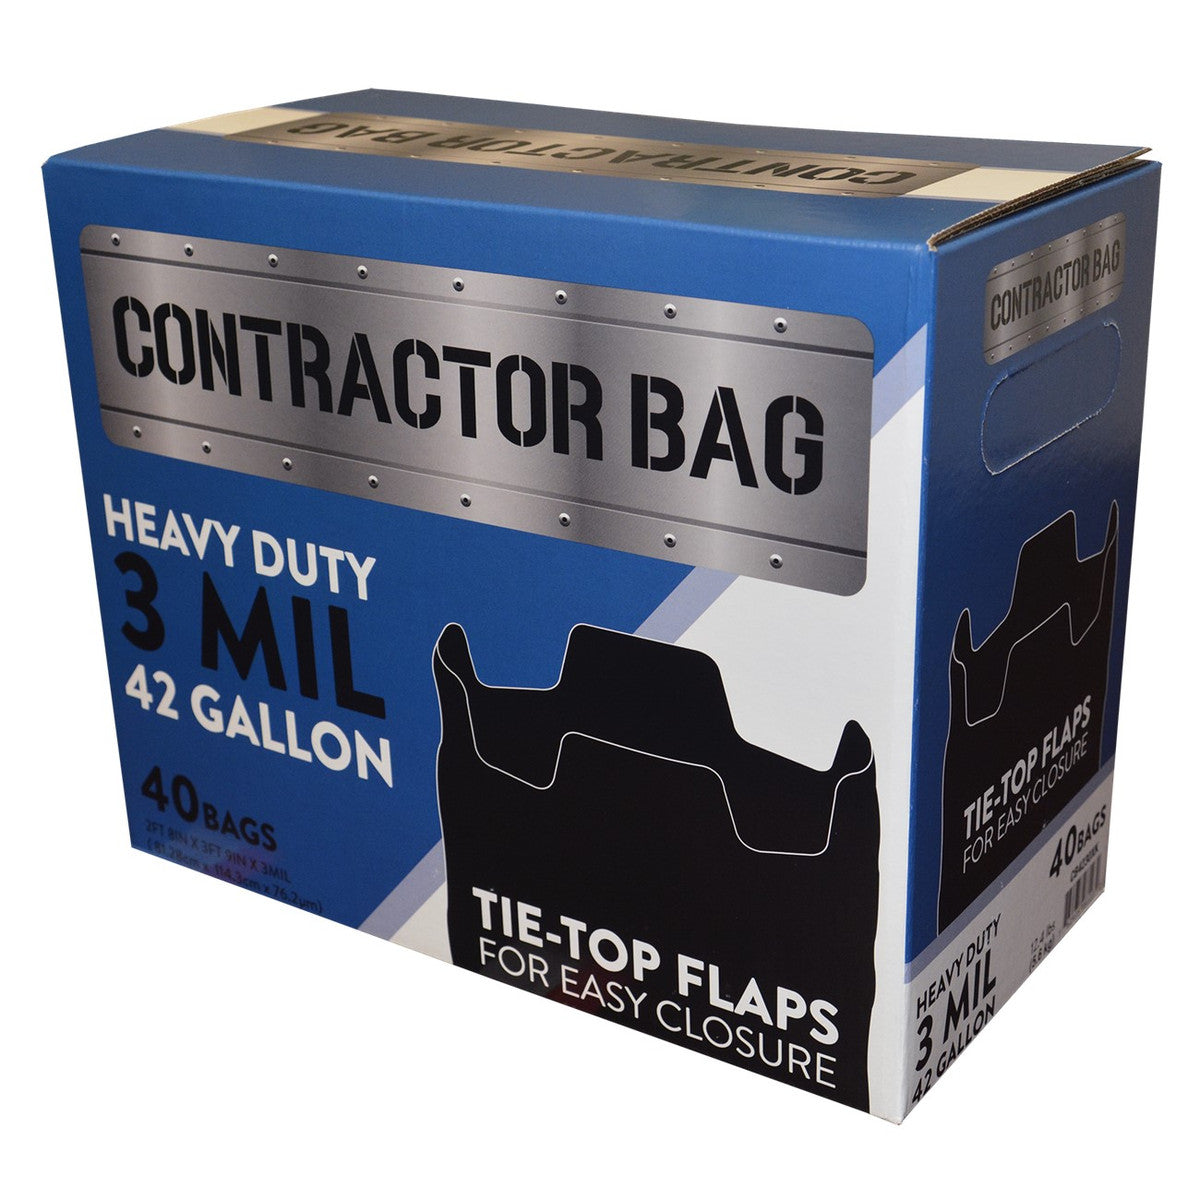 42 Gallon 3 MIL Contractor Bags